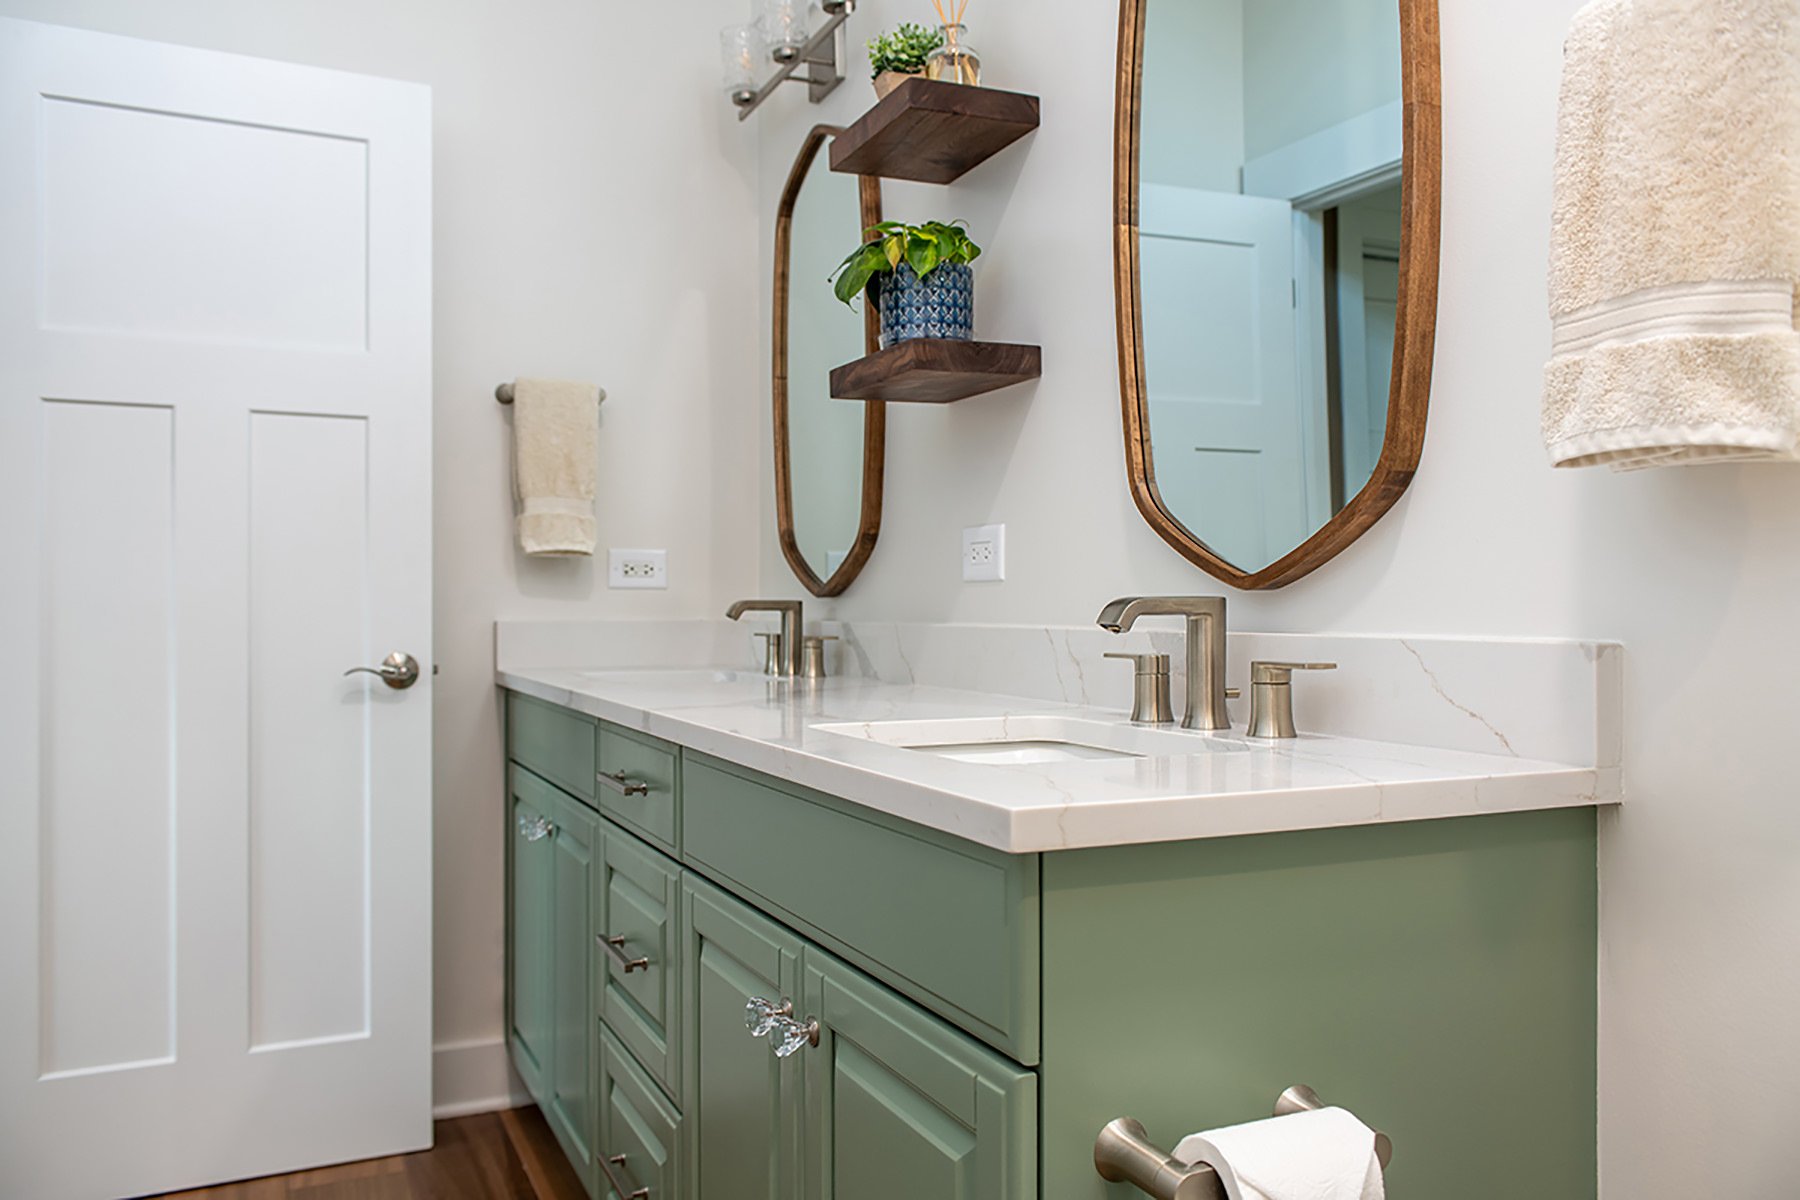 Remodeled primary bathroom with sage green painted cabinets and unique wood framed vanity mirrors and white countertops.